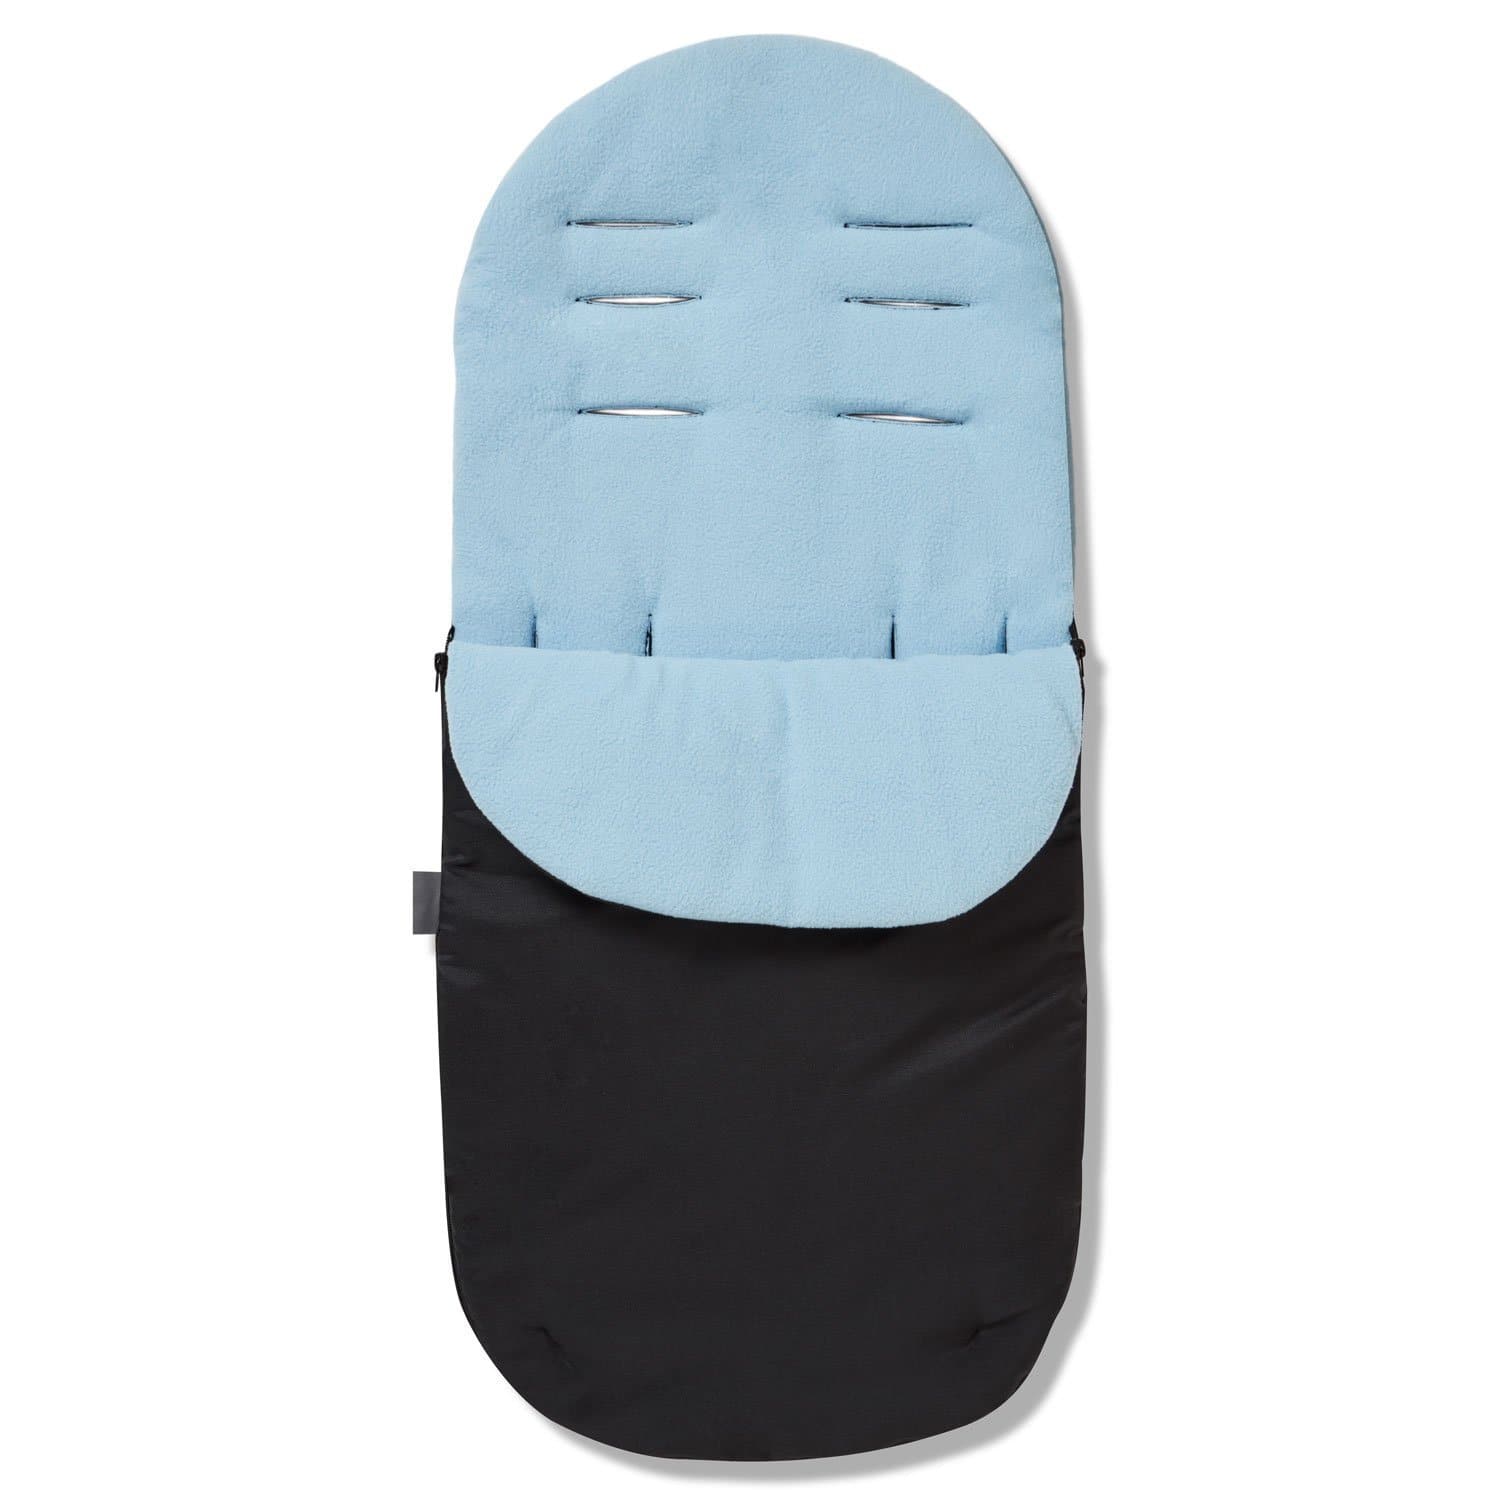 Footmuff / Cosy Toes Compatible with Formula - For Your Little One